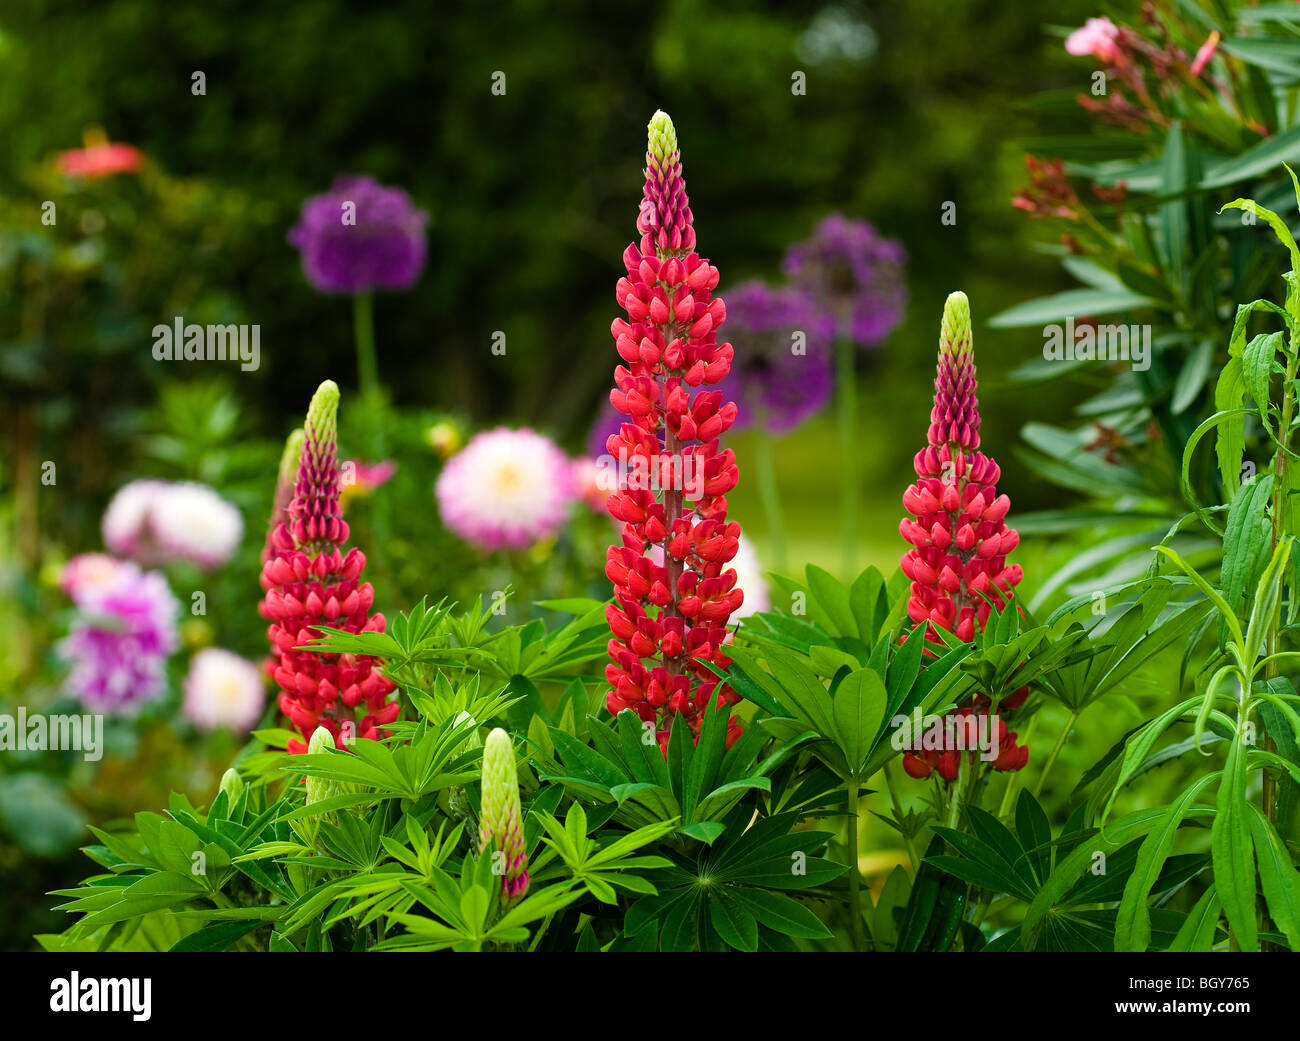 Large-leaved lupines (Lupinus polyphyllus) in bloom Stock Photo